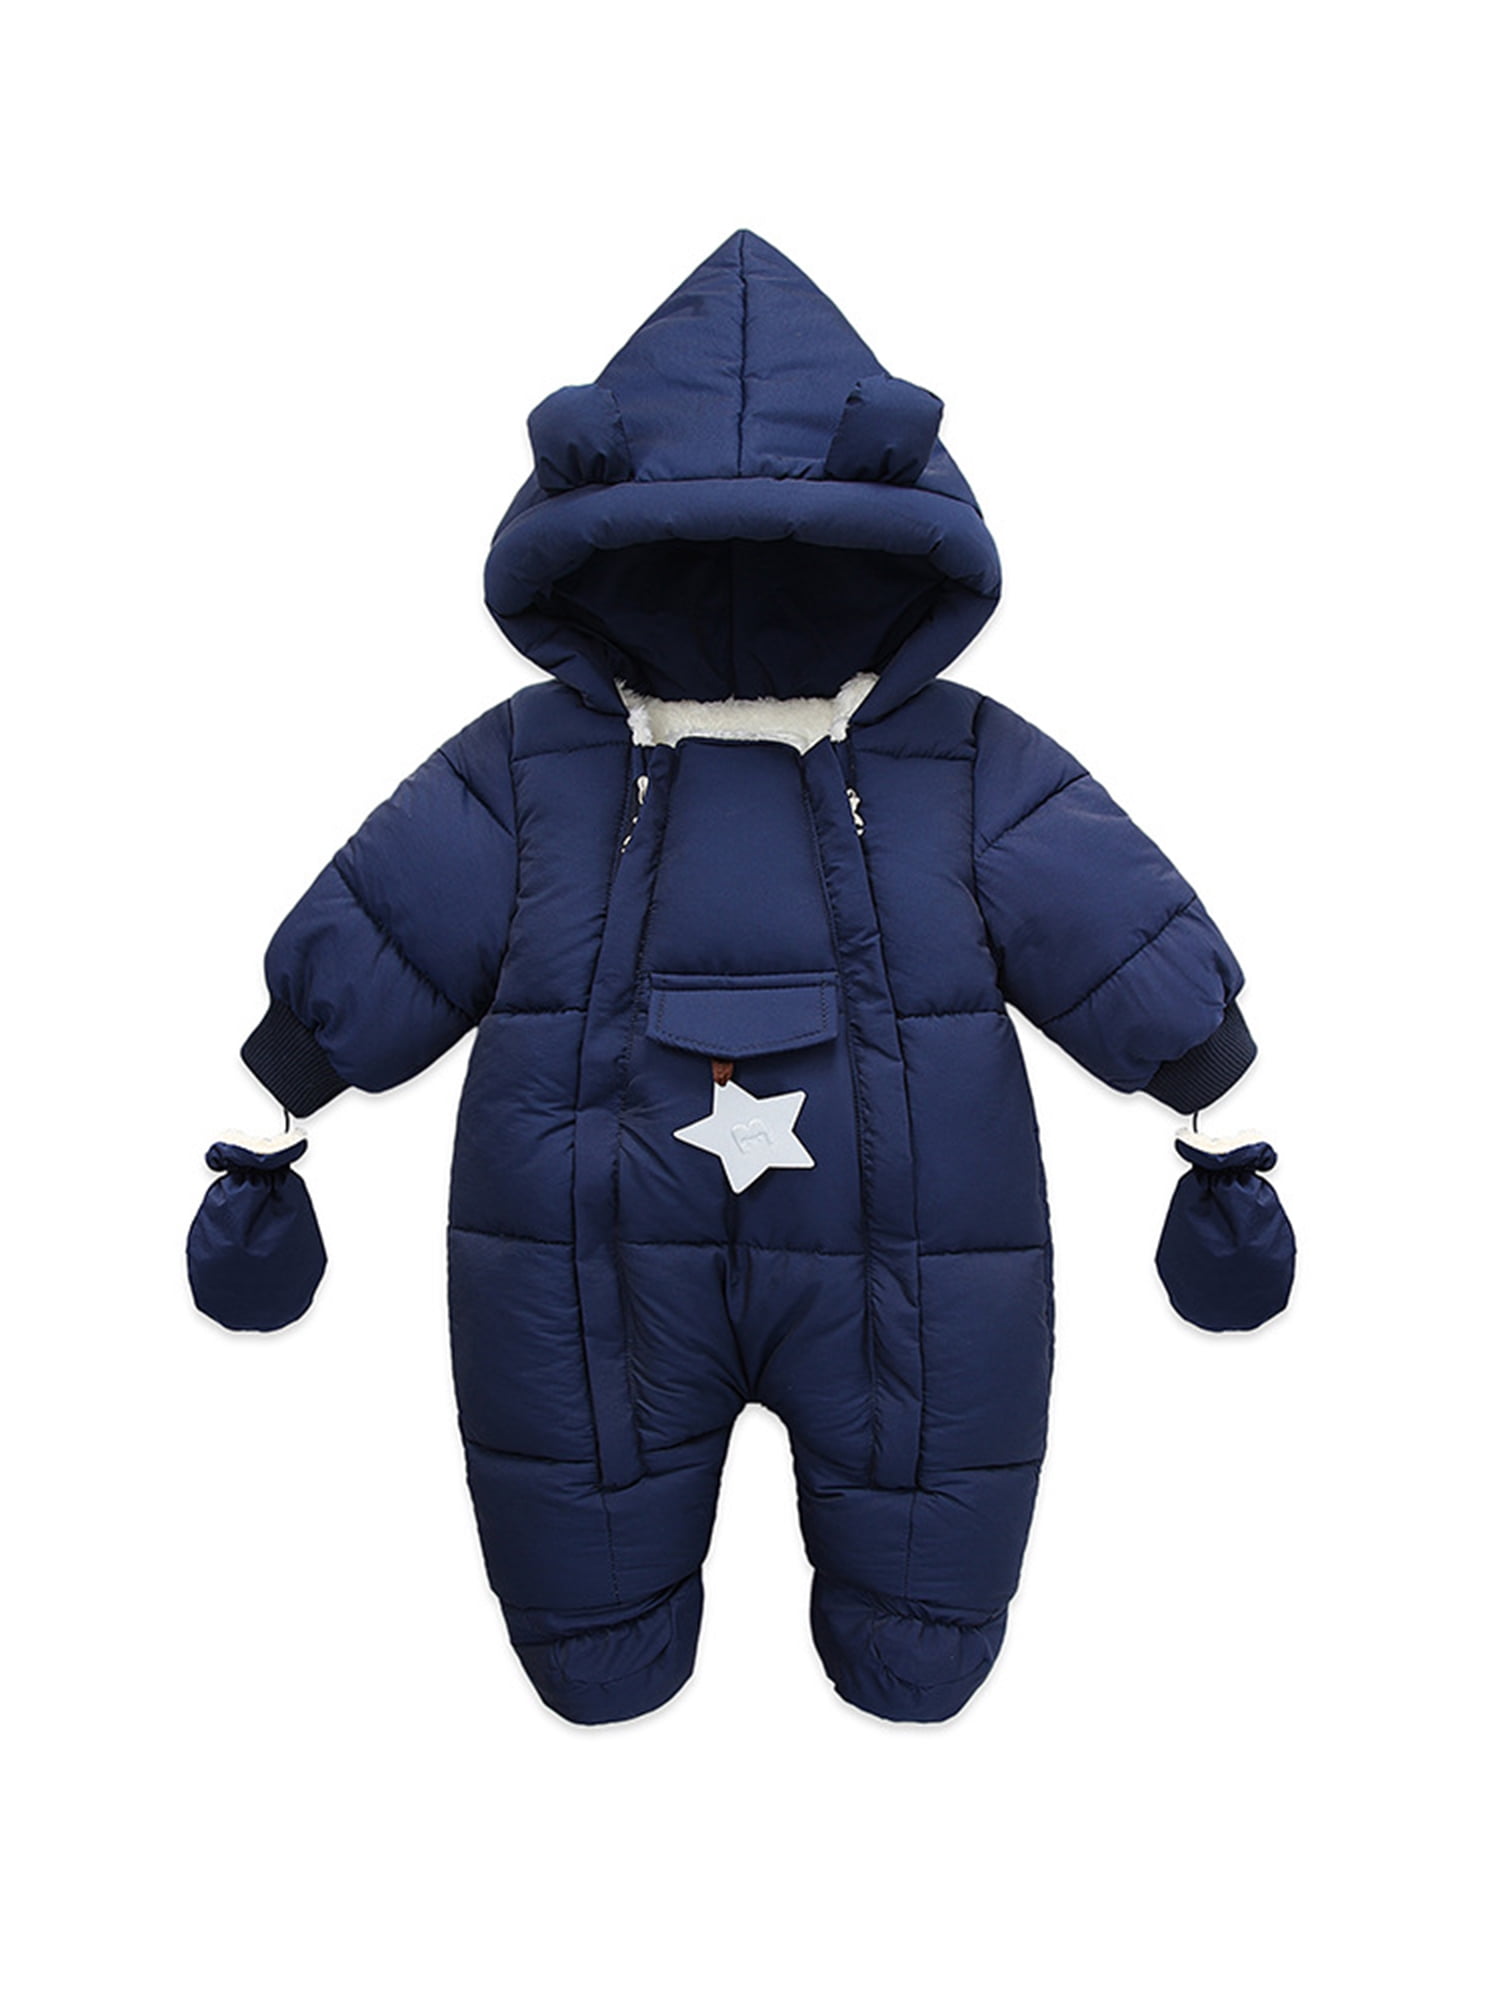 Romper + Gloves + Shoes for 0-24 Months LPATTERN Baby Girls Boys Warm Down Romper All in One Snowsuit One Piece Puffer Suit Winter Infant Bodysuits Outfit Double Zipper Jumpsuit 3Pcs Set 